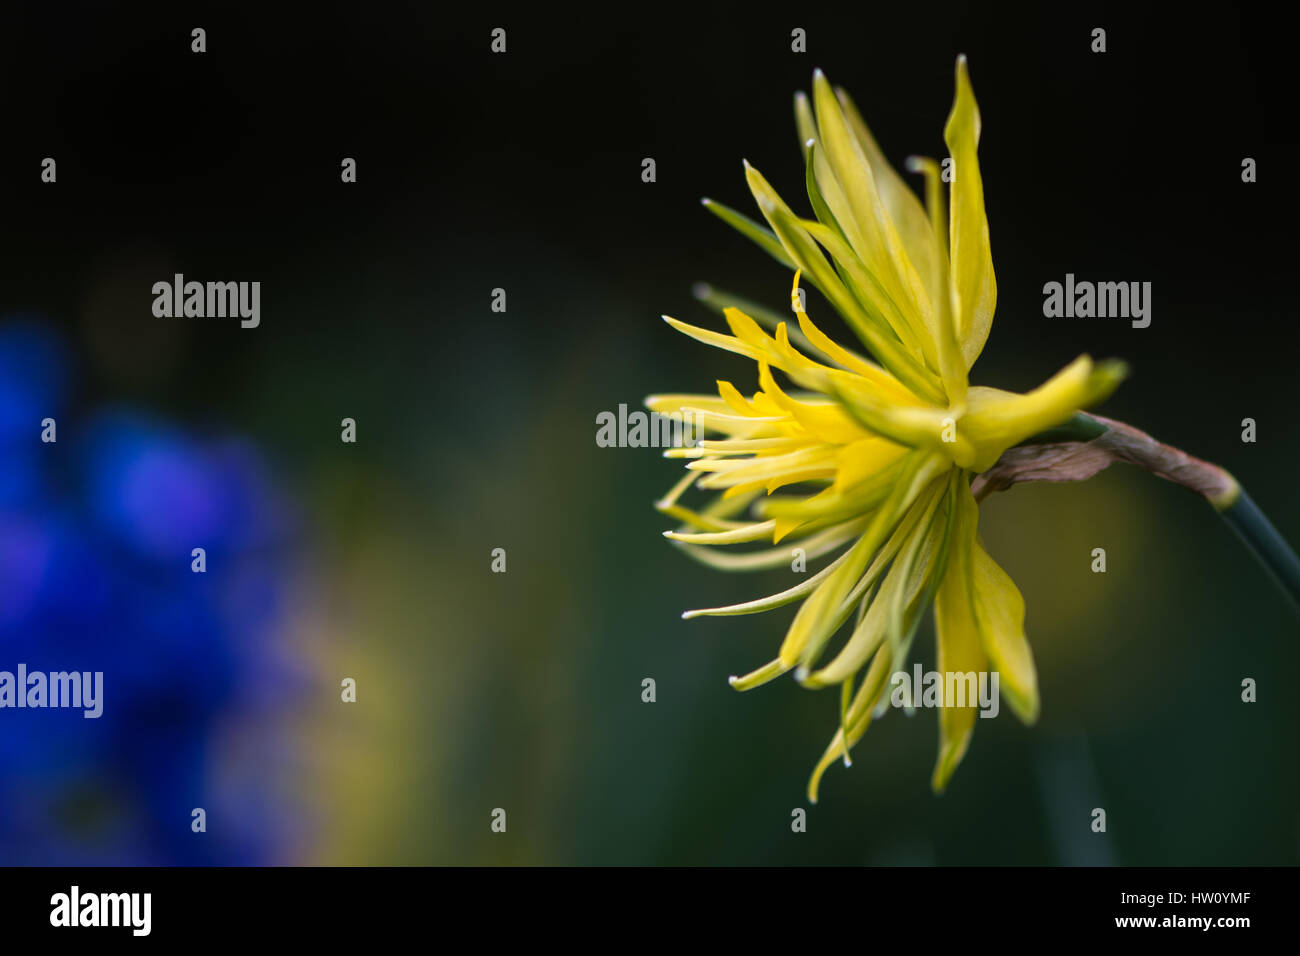 Daffodil Narcissus Rip van winkle flower. Yellow flower of spring perennial plant in the Amaryllidaceae (amaryllis) family Stock Photo